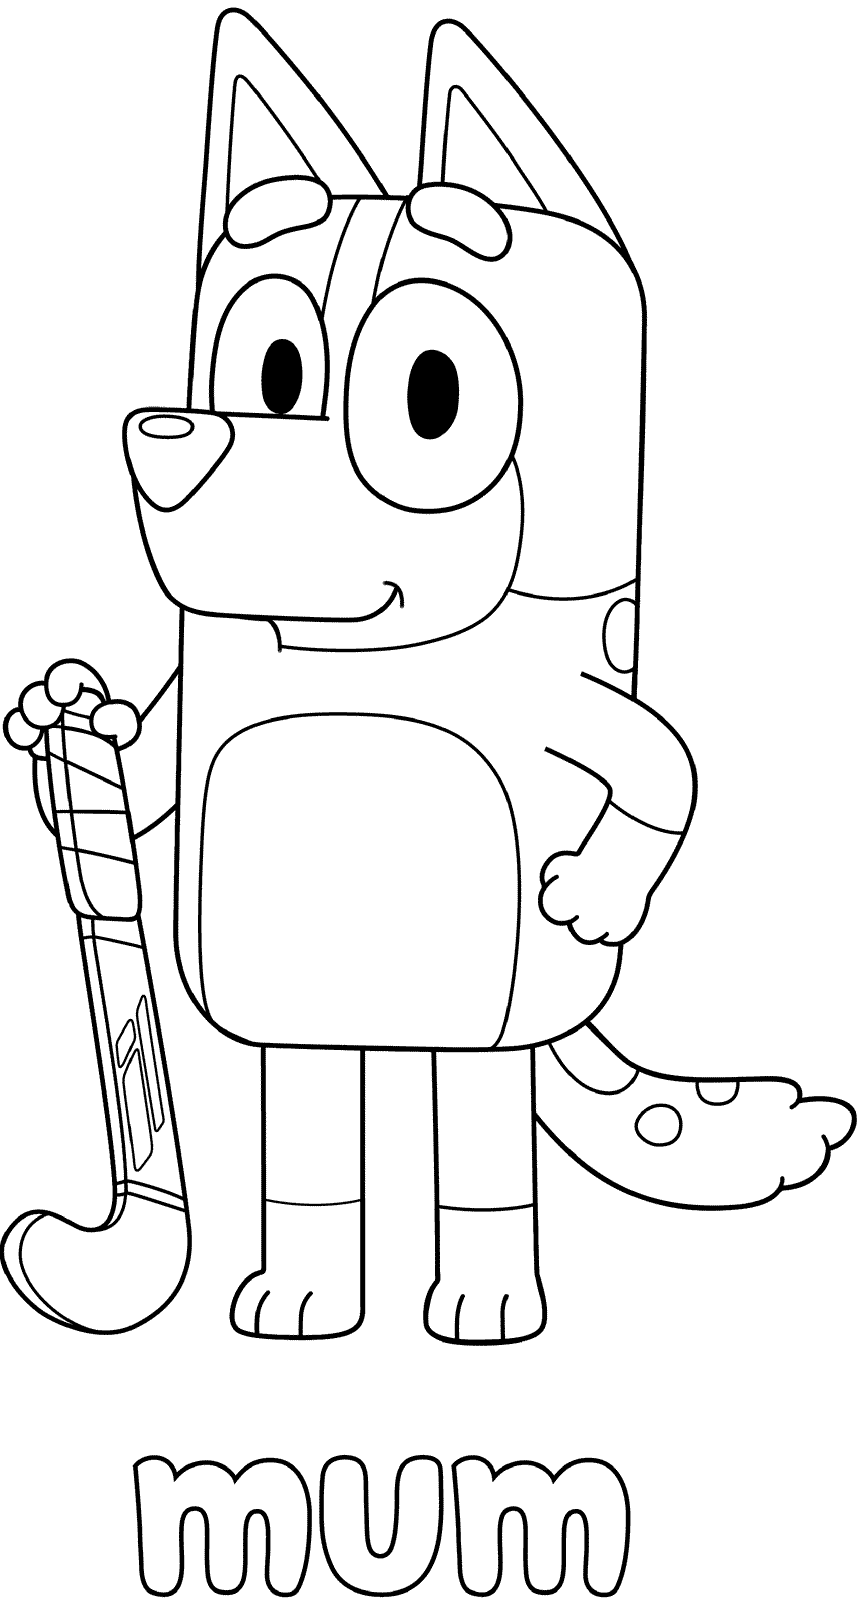 Chilli Heeler Bingos Mums Coloring Pages   Coloring Cool